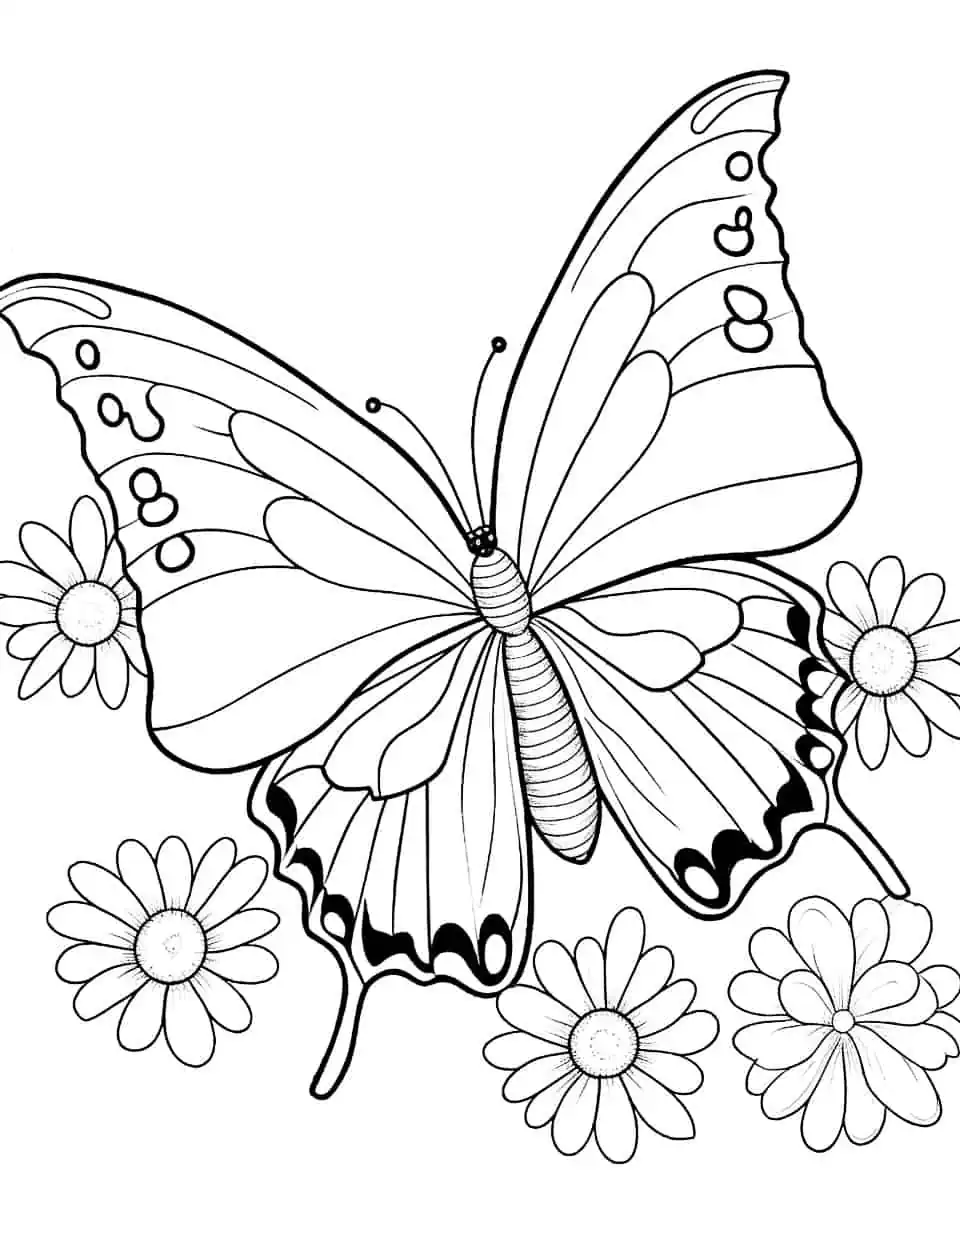 Nature's Symphony Butterfly Coloring Page - A coloring page showcasing butterflies and flowers in harmony with nature’s beauty.